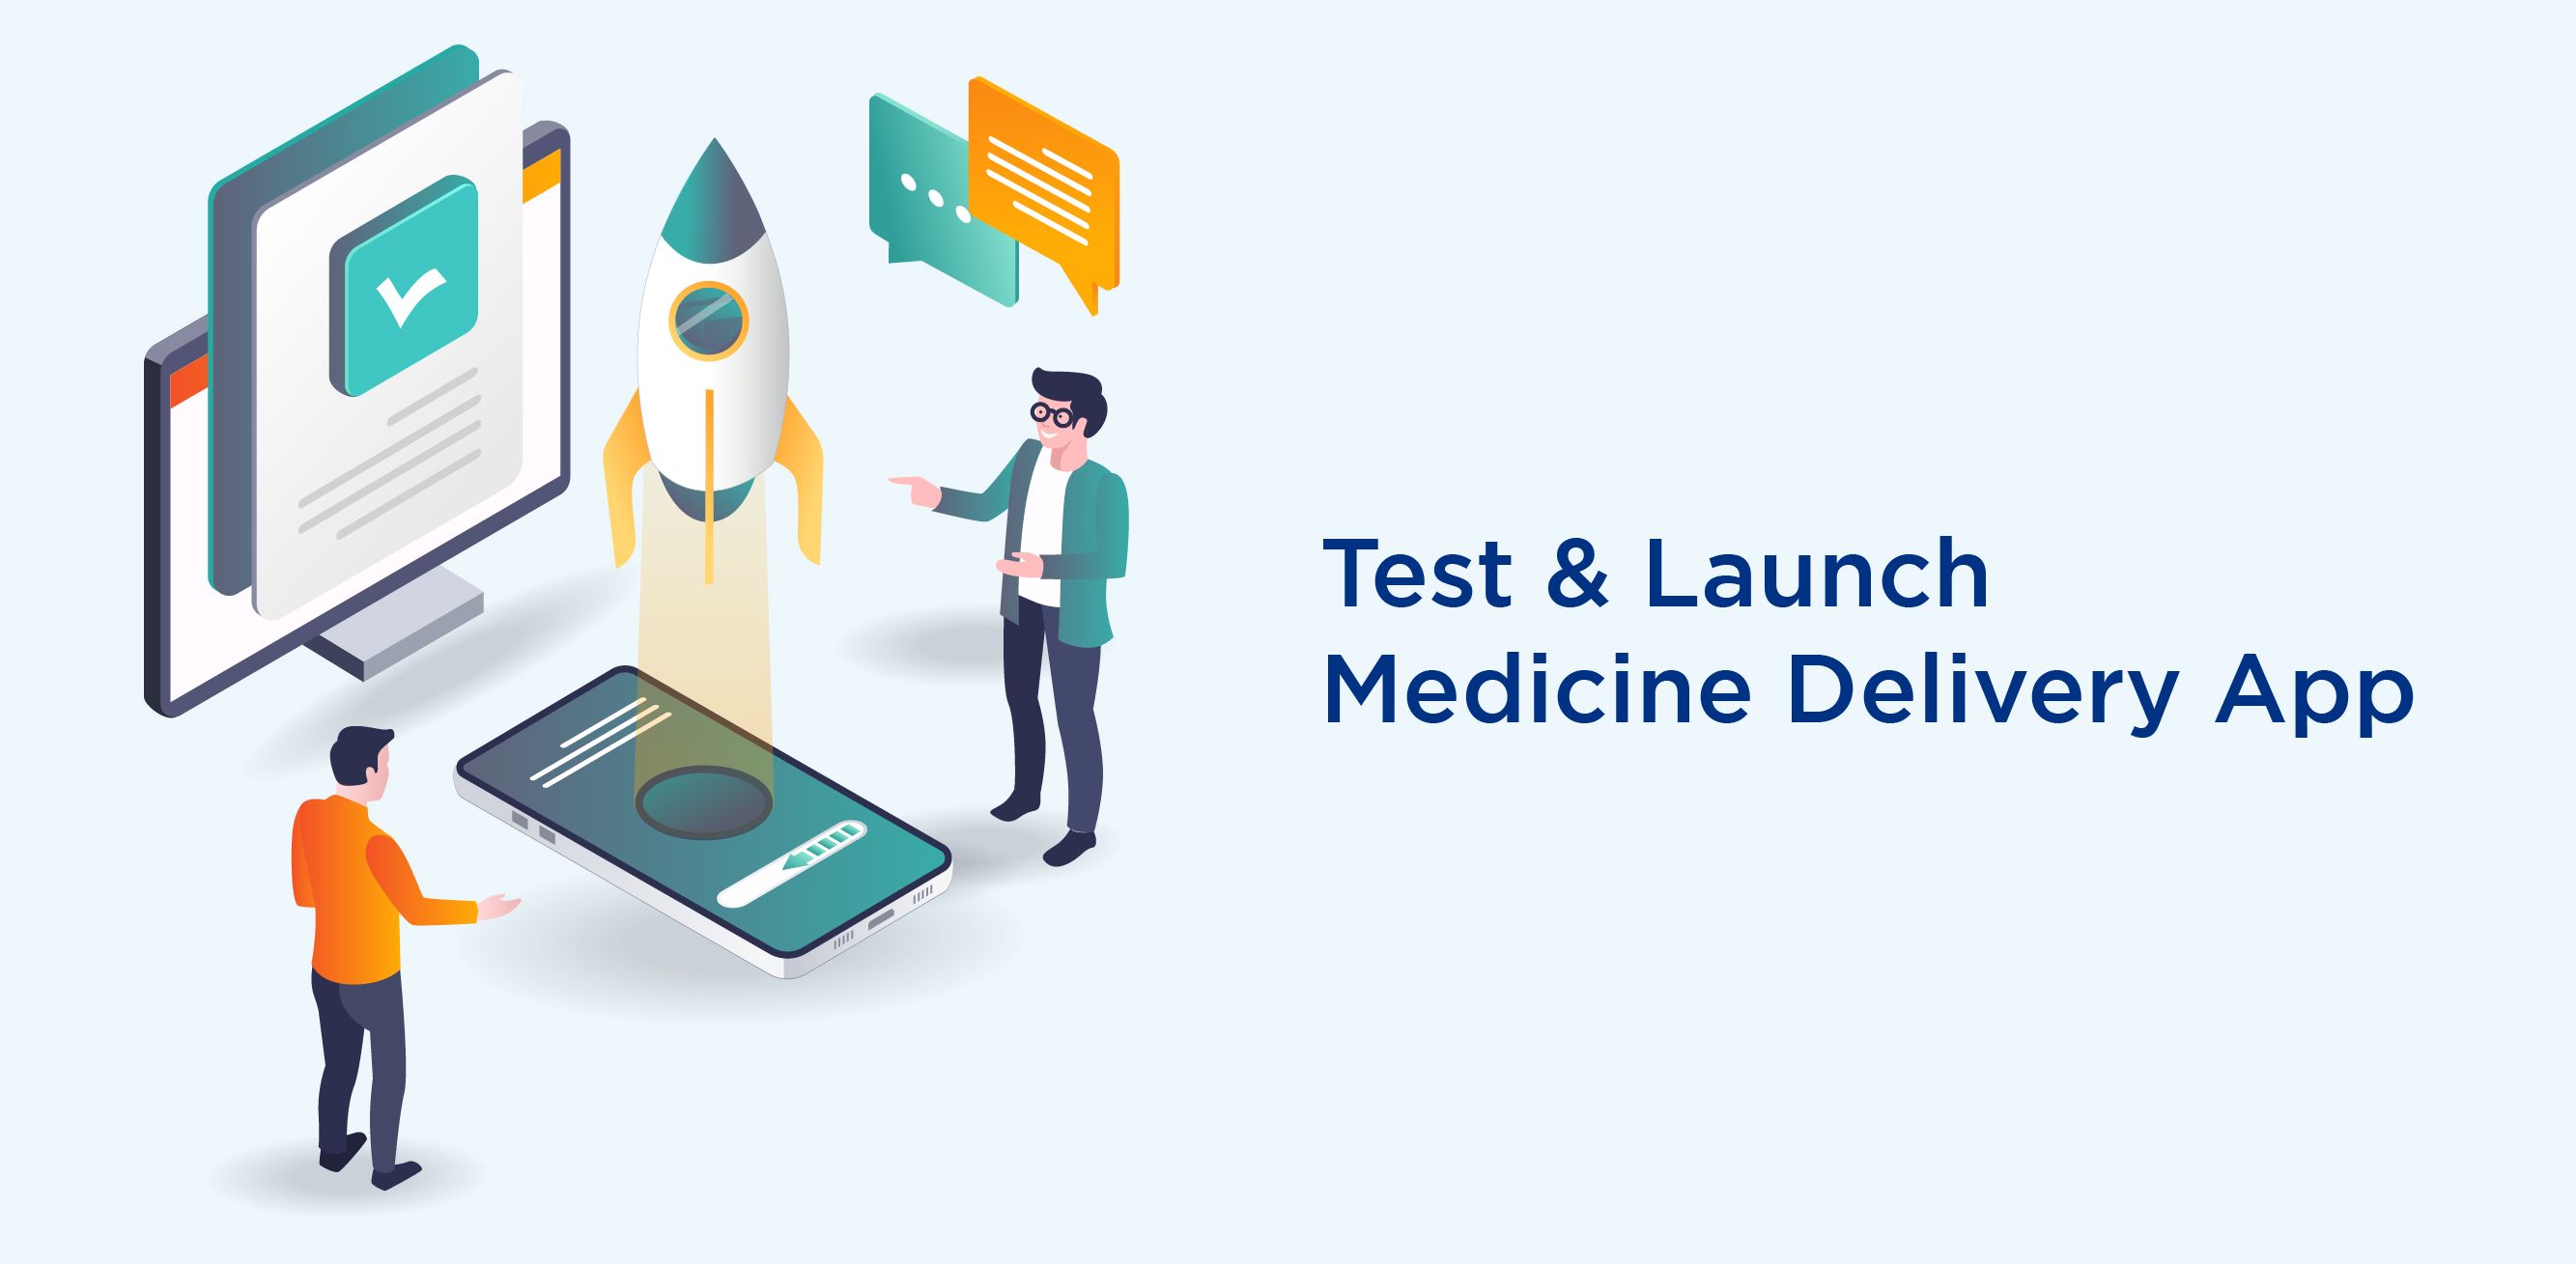 Test & Launch Medicine Delivery App